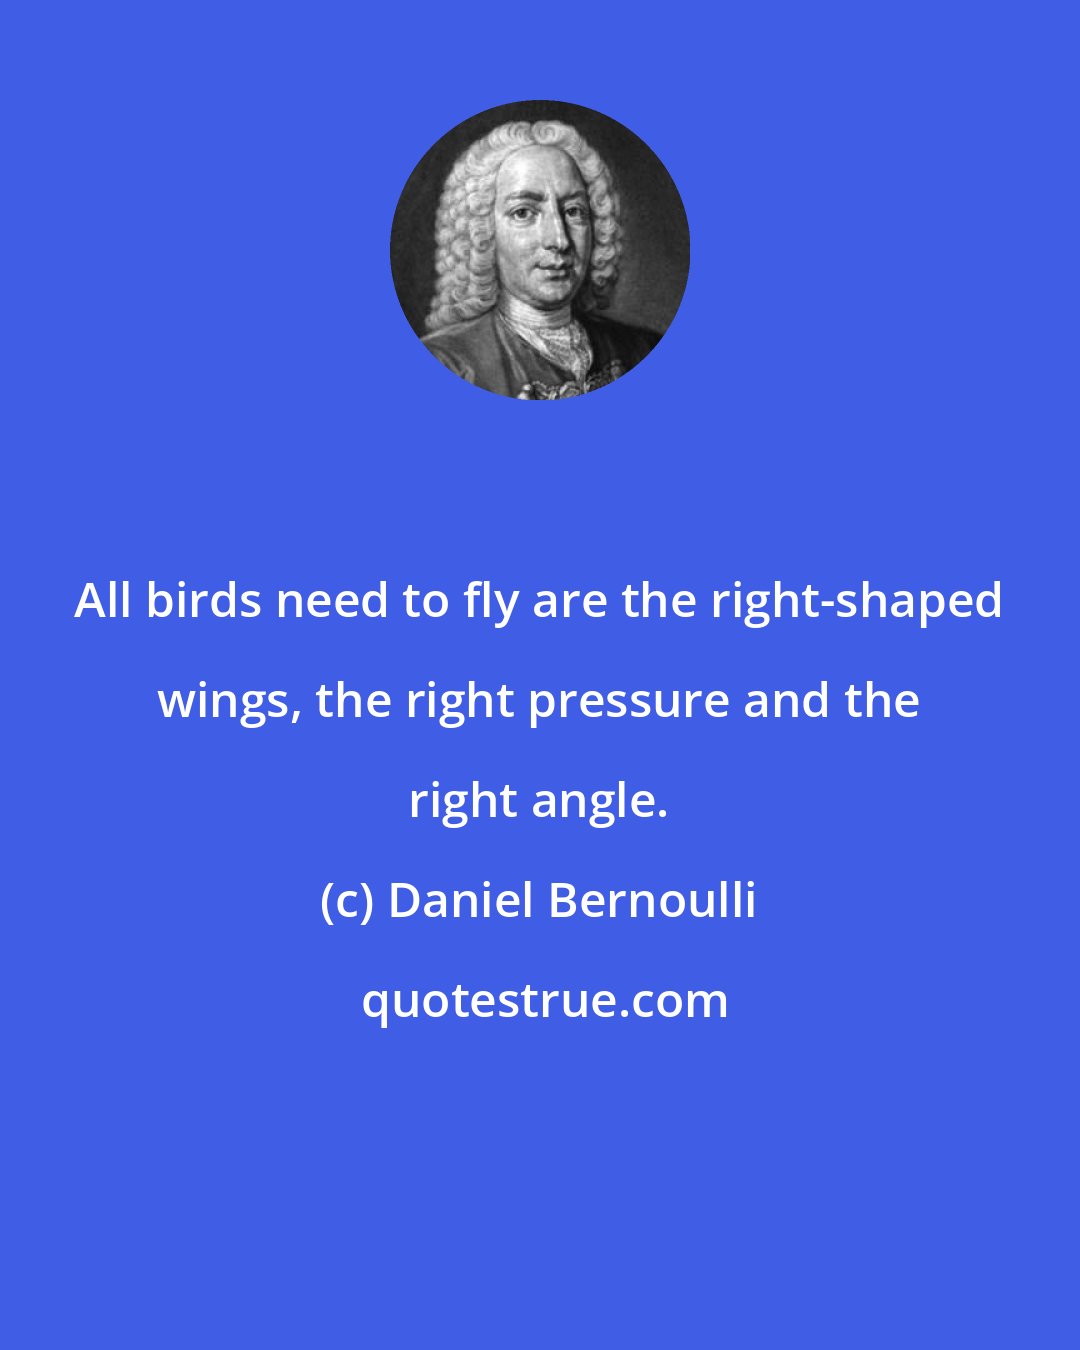 Daniel Bernoulli: All birds need to fly are the right-shaped wings, the right pressure and the right angle.